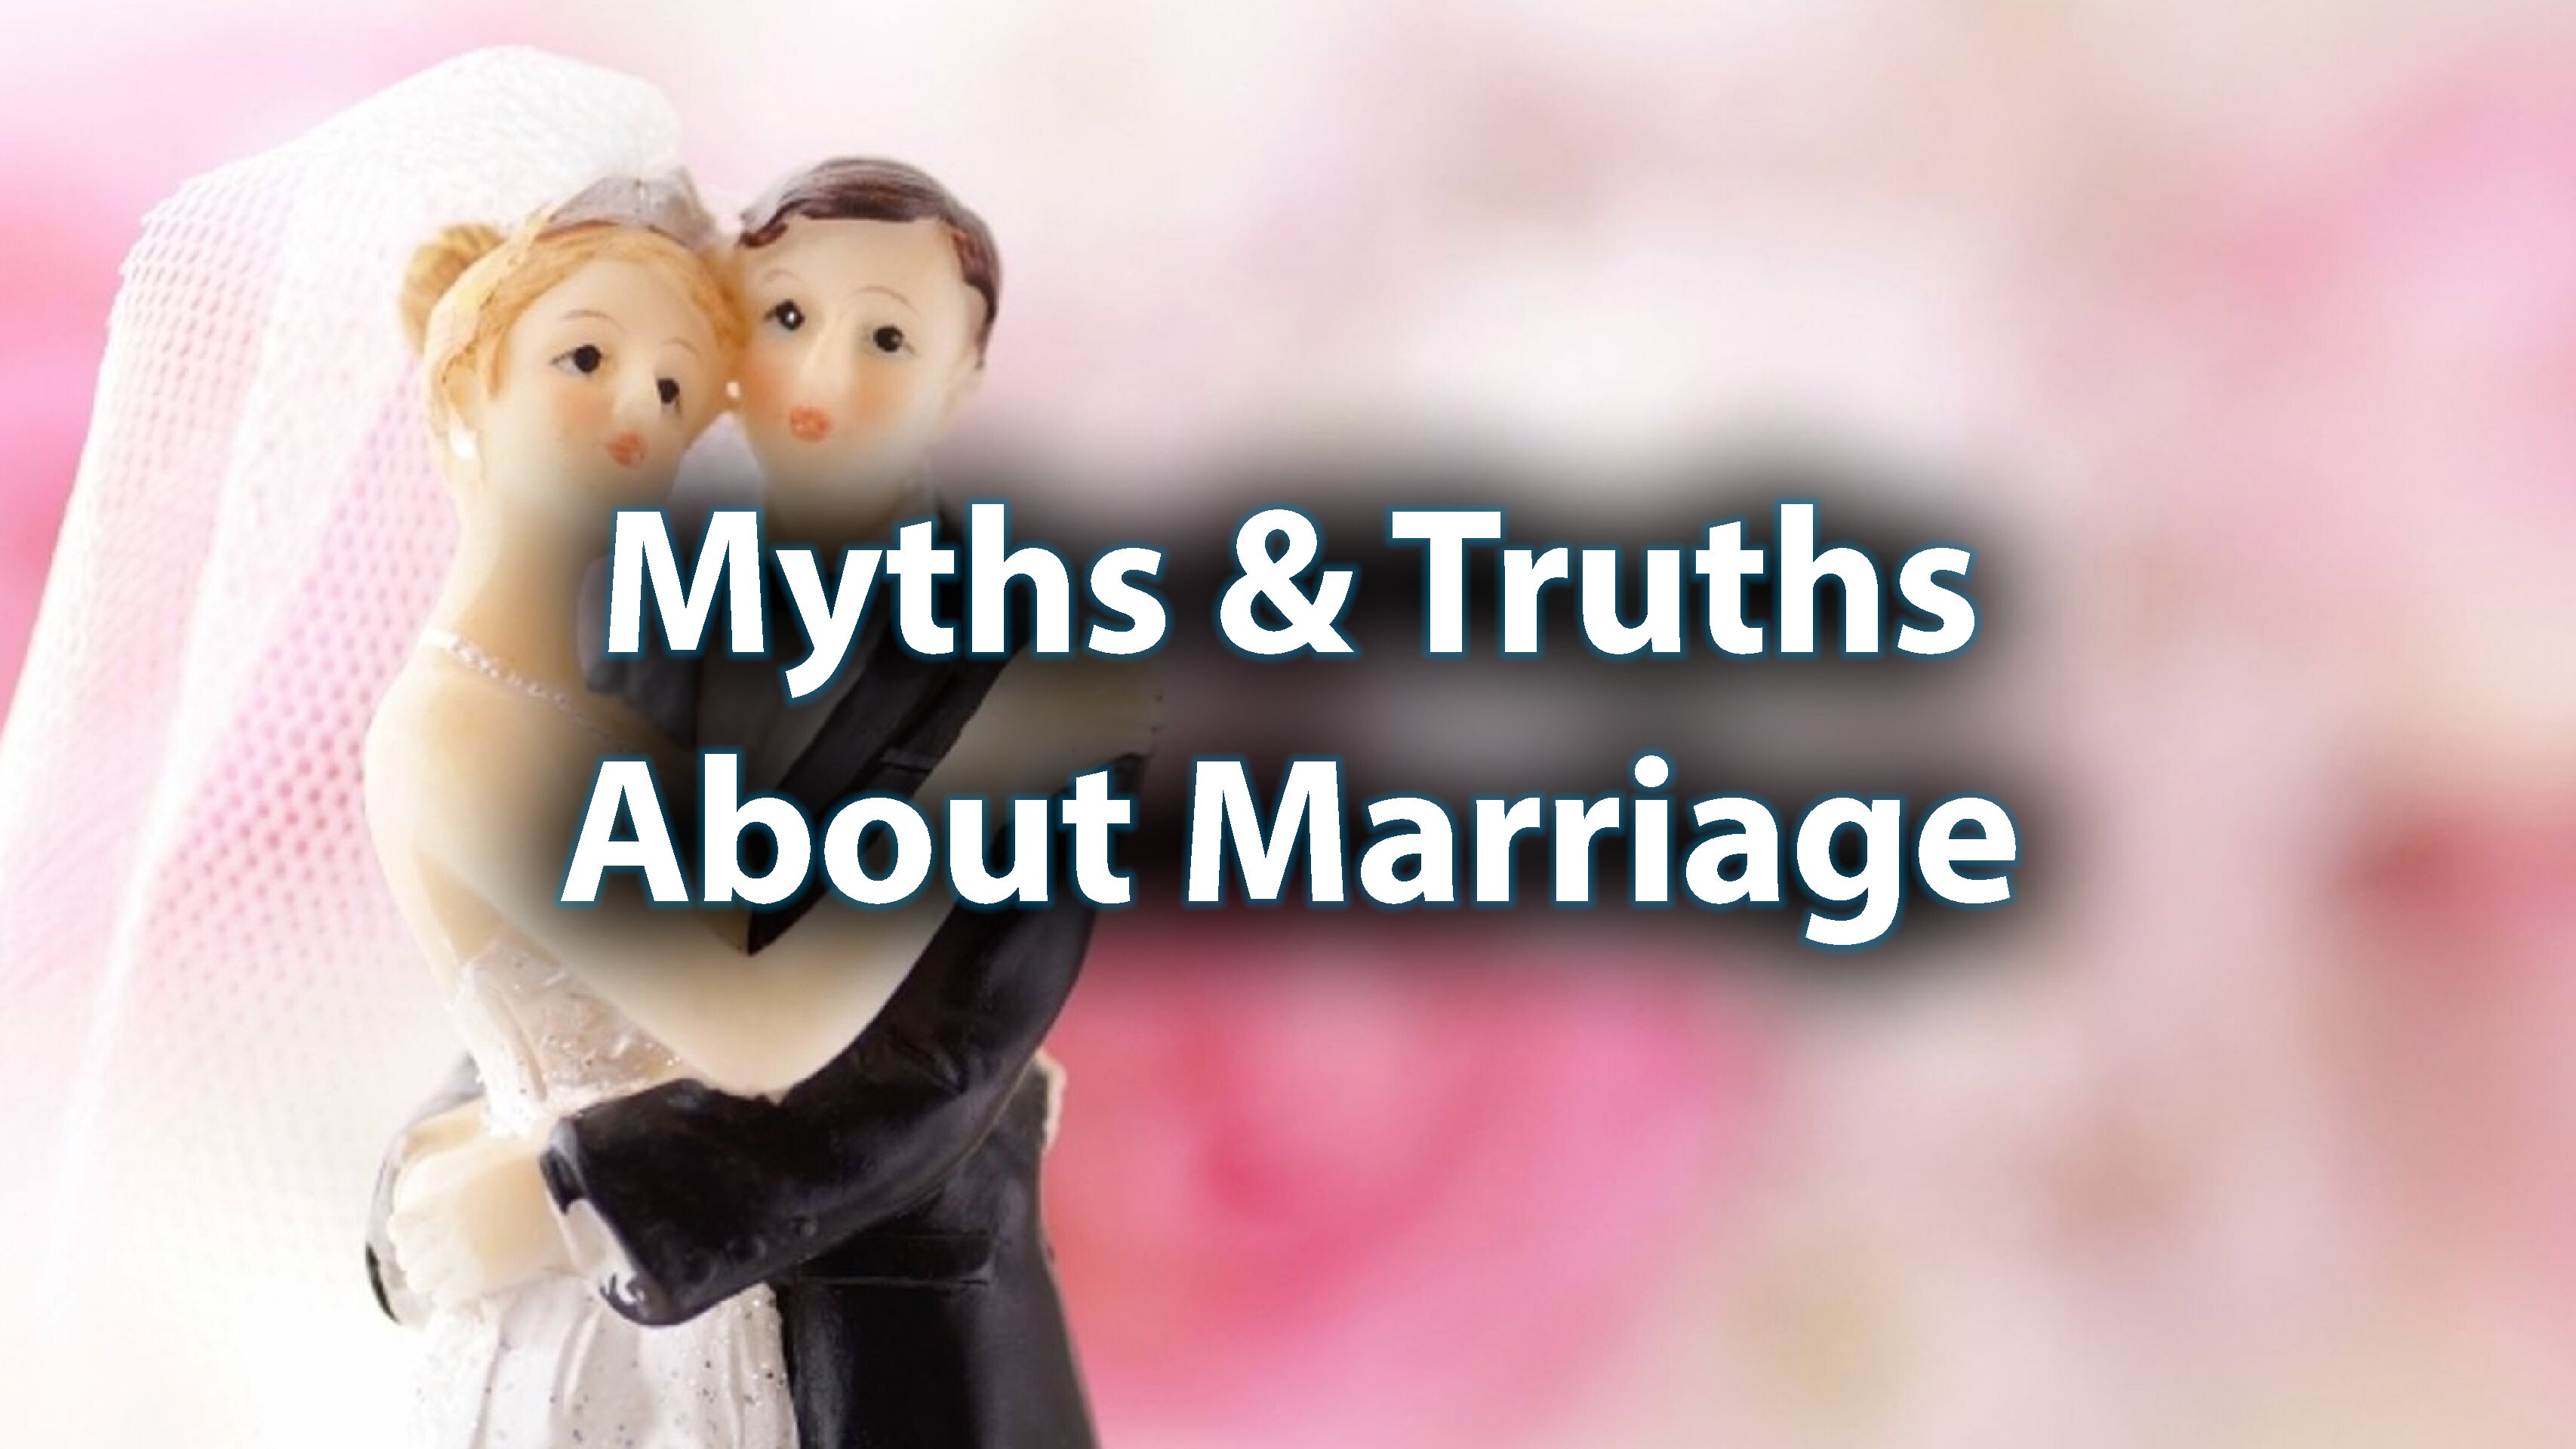 Day 23: Myths and Truths About Marriage